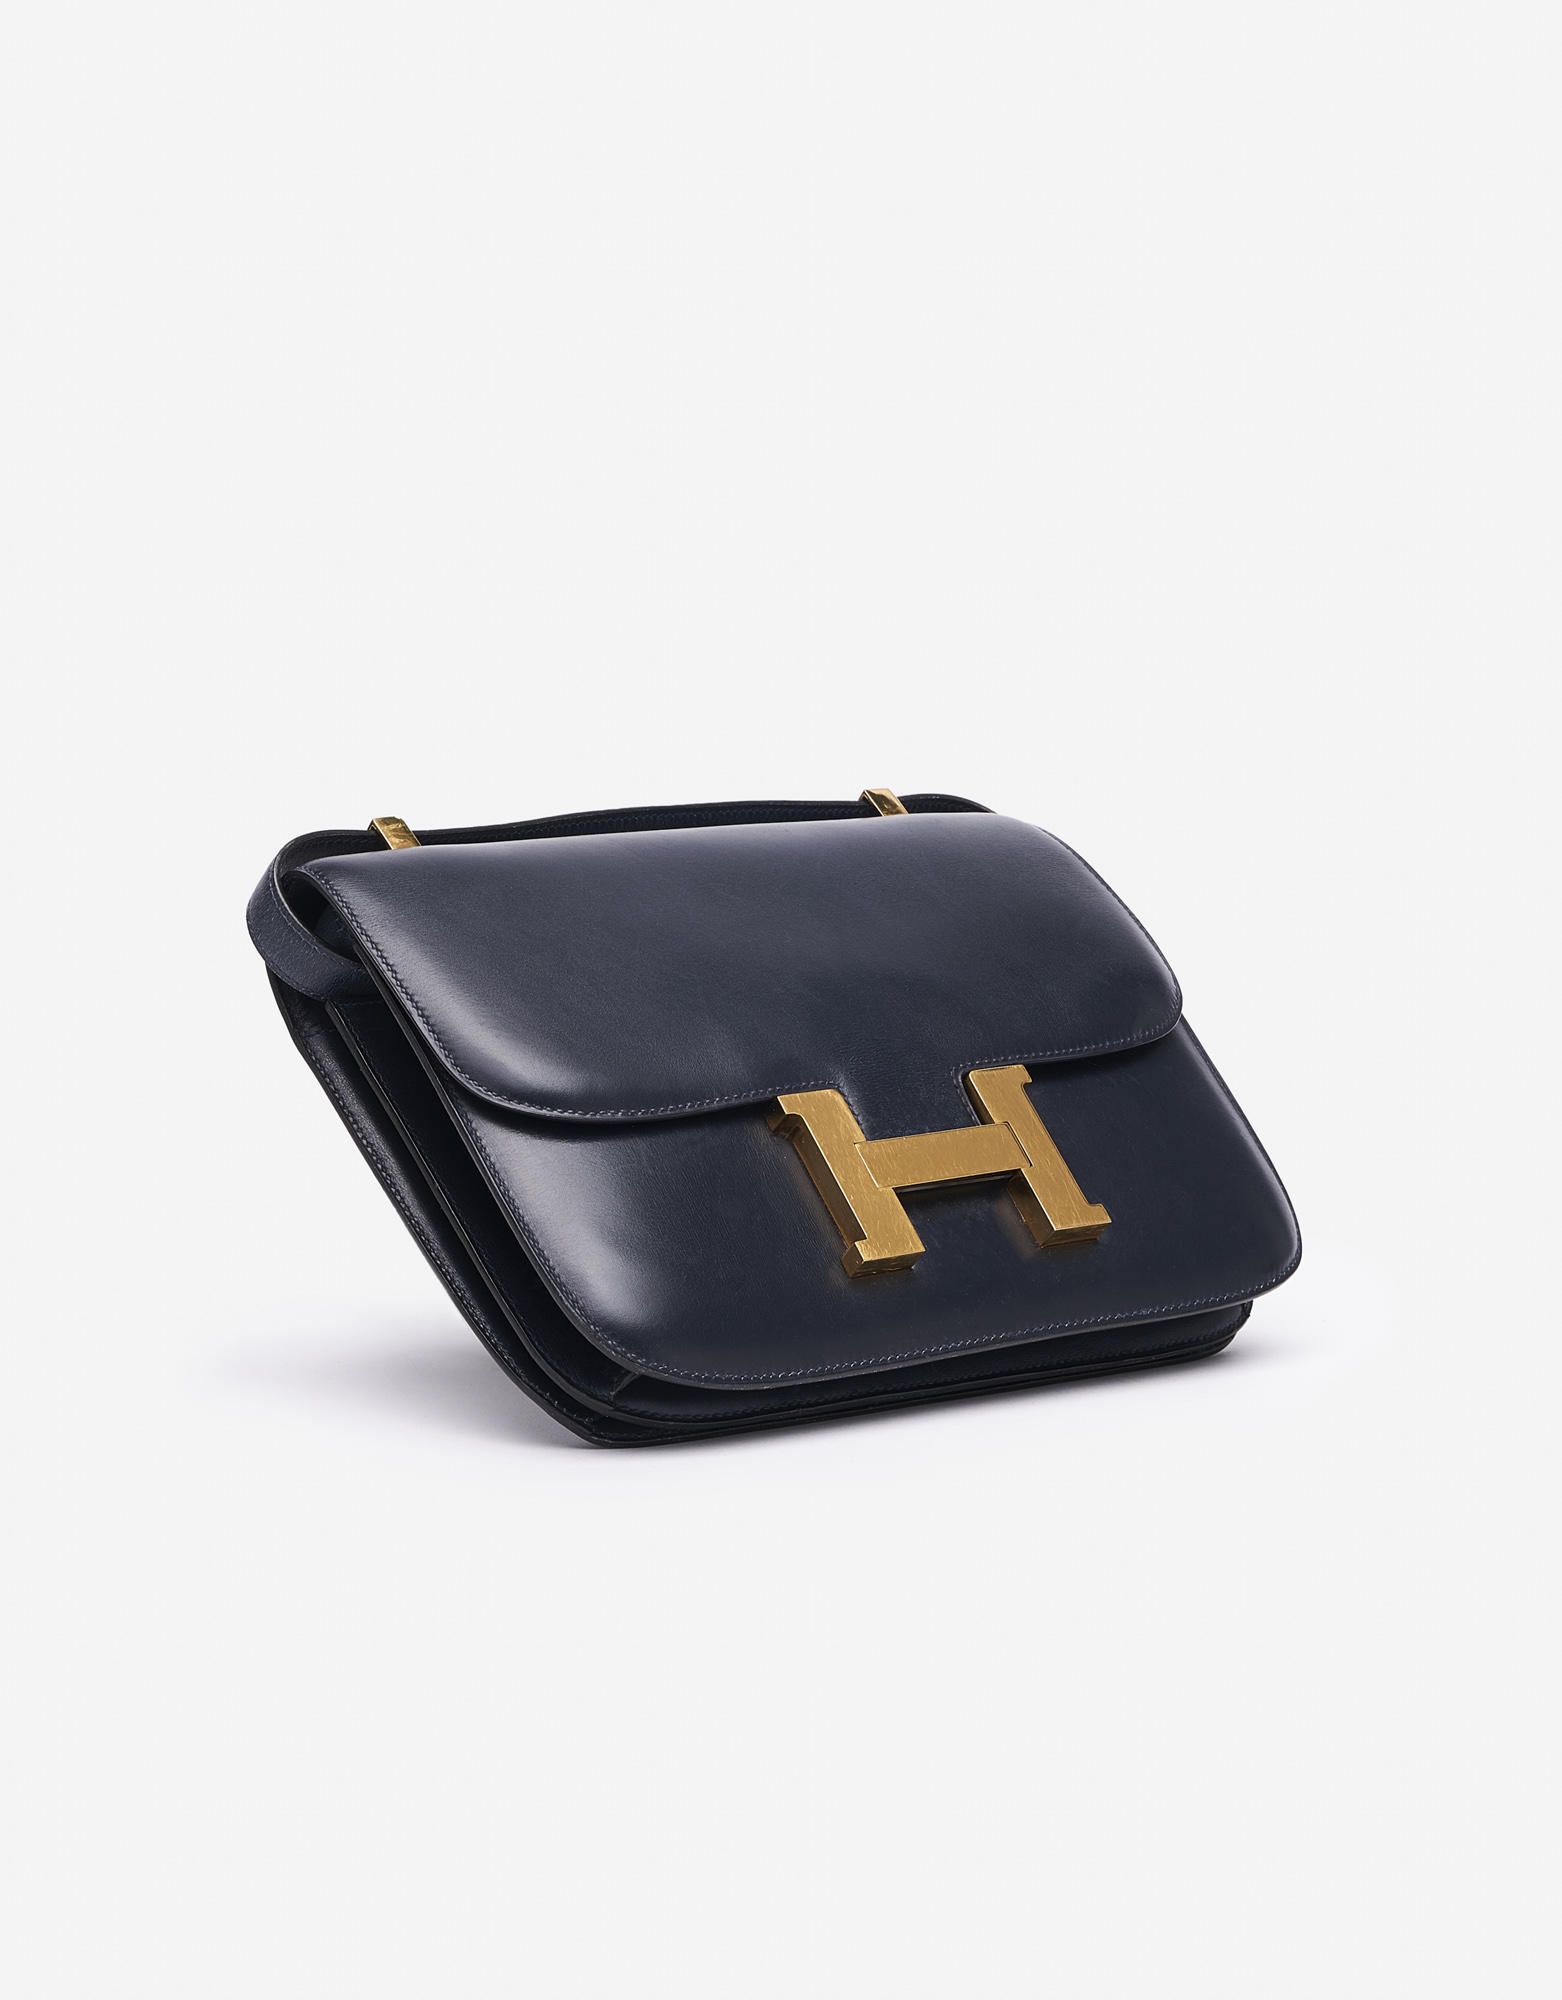 Lot - HERMES NAVY CALF BOX LEATHER CONSTANCE BAG, 1987 7 x 9 x 2 in. (17.8  x 22.9 x 5.1 cm.)